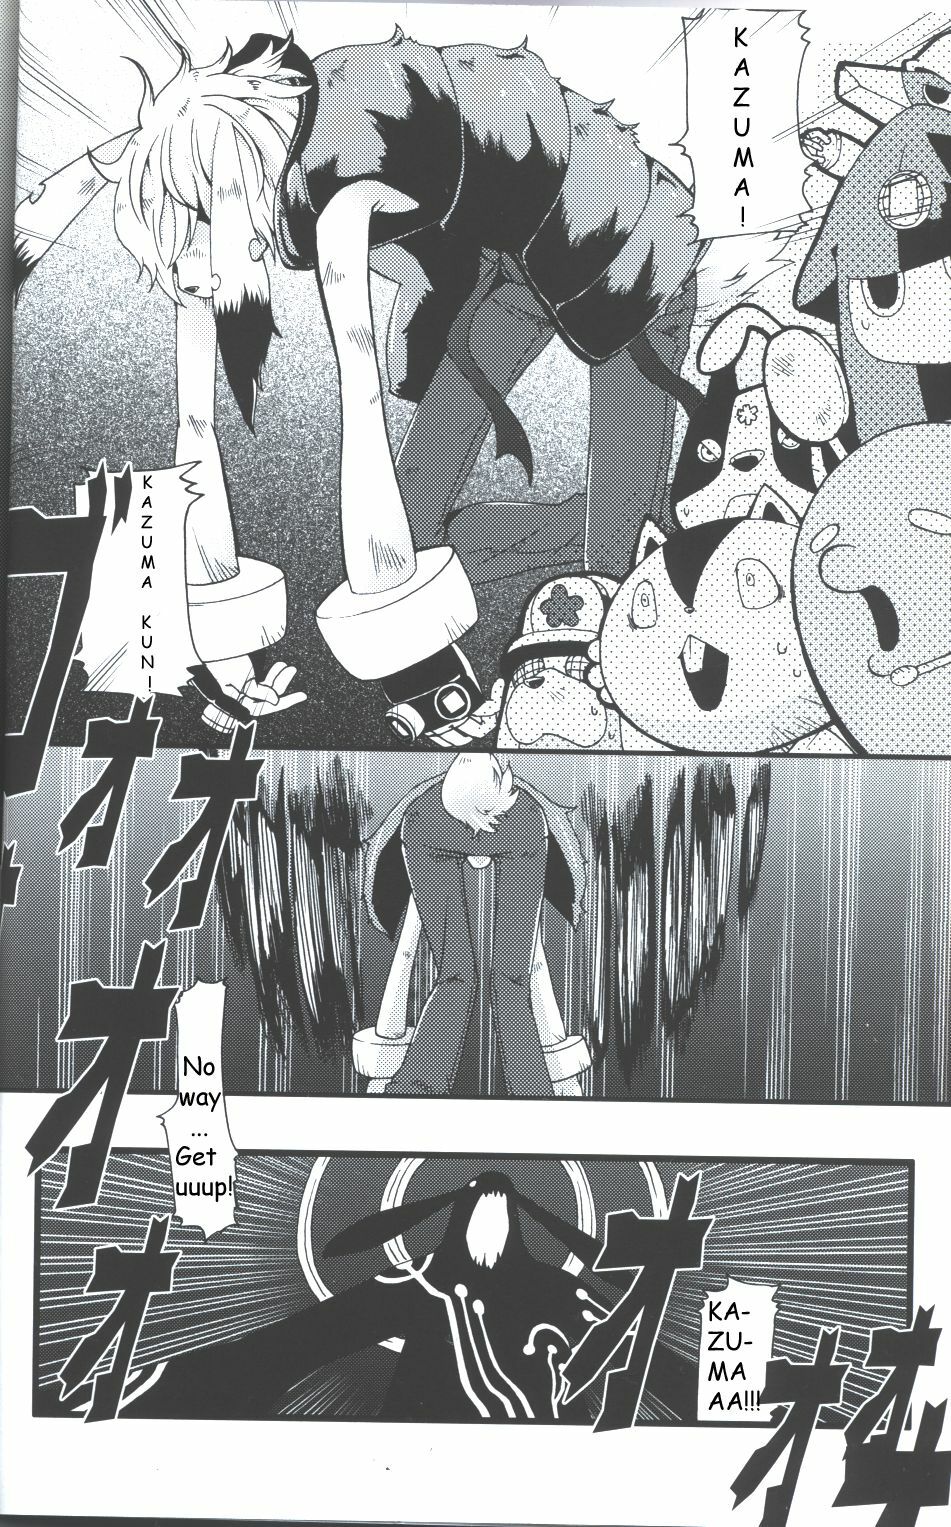 [Dogear (Inumimi Moeta)] Requirements of the King (Summer Wars) [English] page 2 full